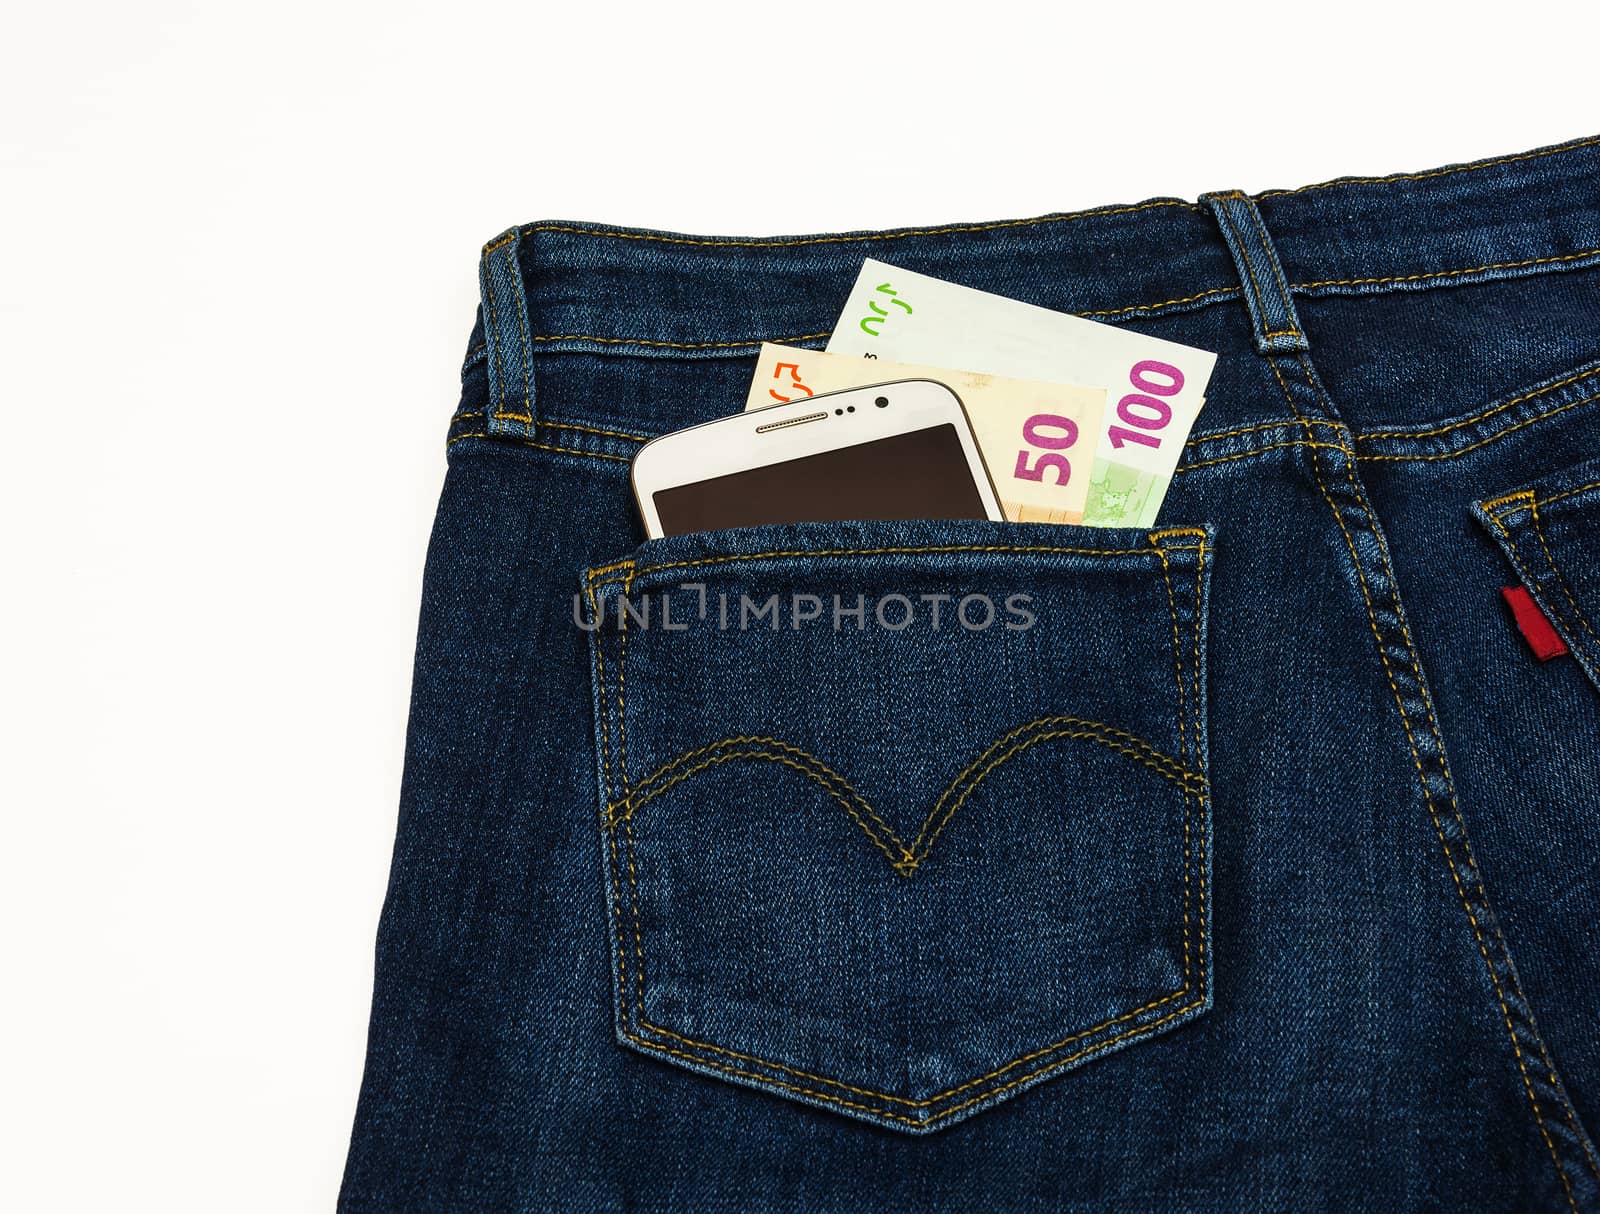 Trousers sewn from a blue denim lie on a white surface. In the back pocket of his pants is smart and banknotes.

